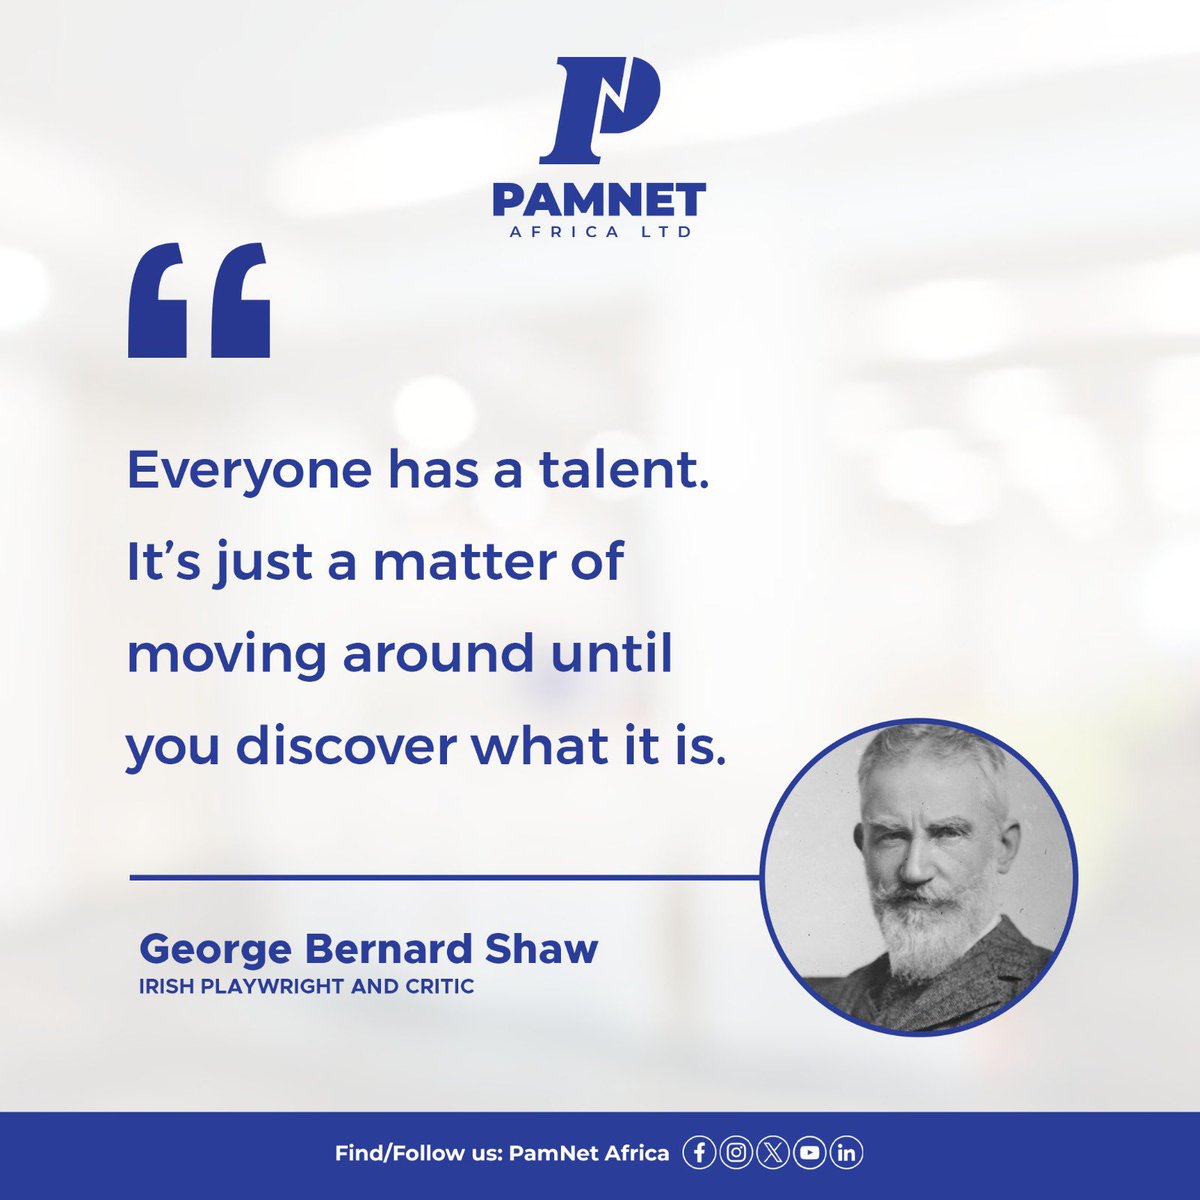 Feeling stuck and unsure where your strengths lie?  As George Bernard Shaw said, 'Everyone has a talent. It's just a matter of moving around until you discover what it is.'

#pamnetafrica #talents #skillsdevelopment #careerdevelopment